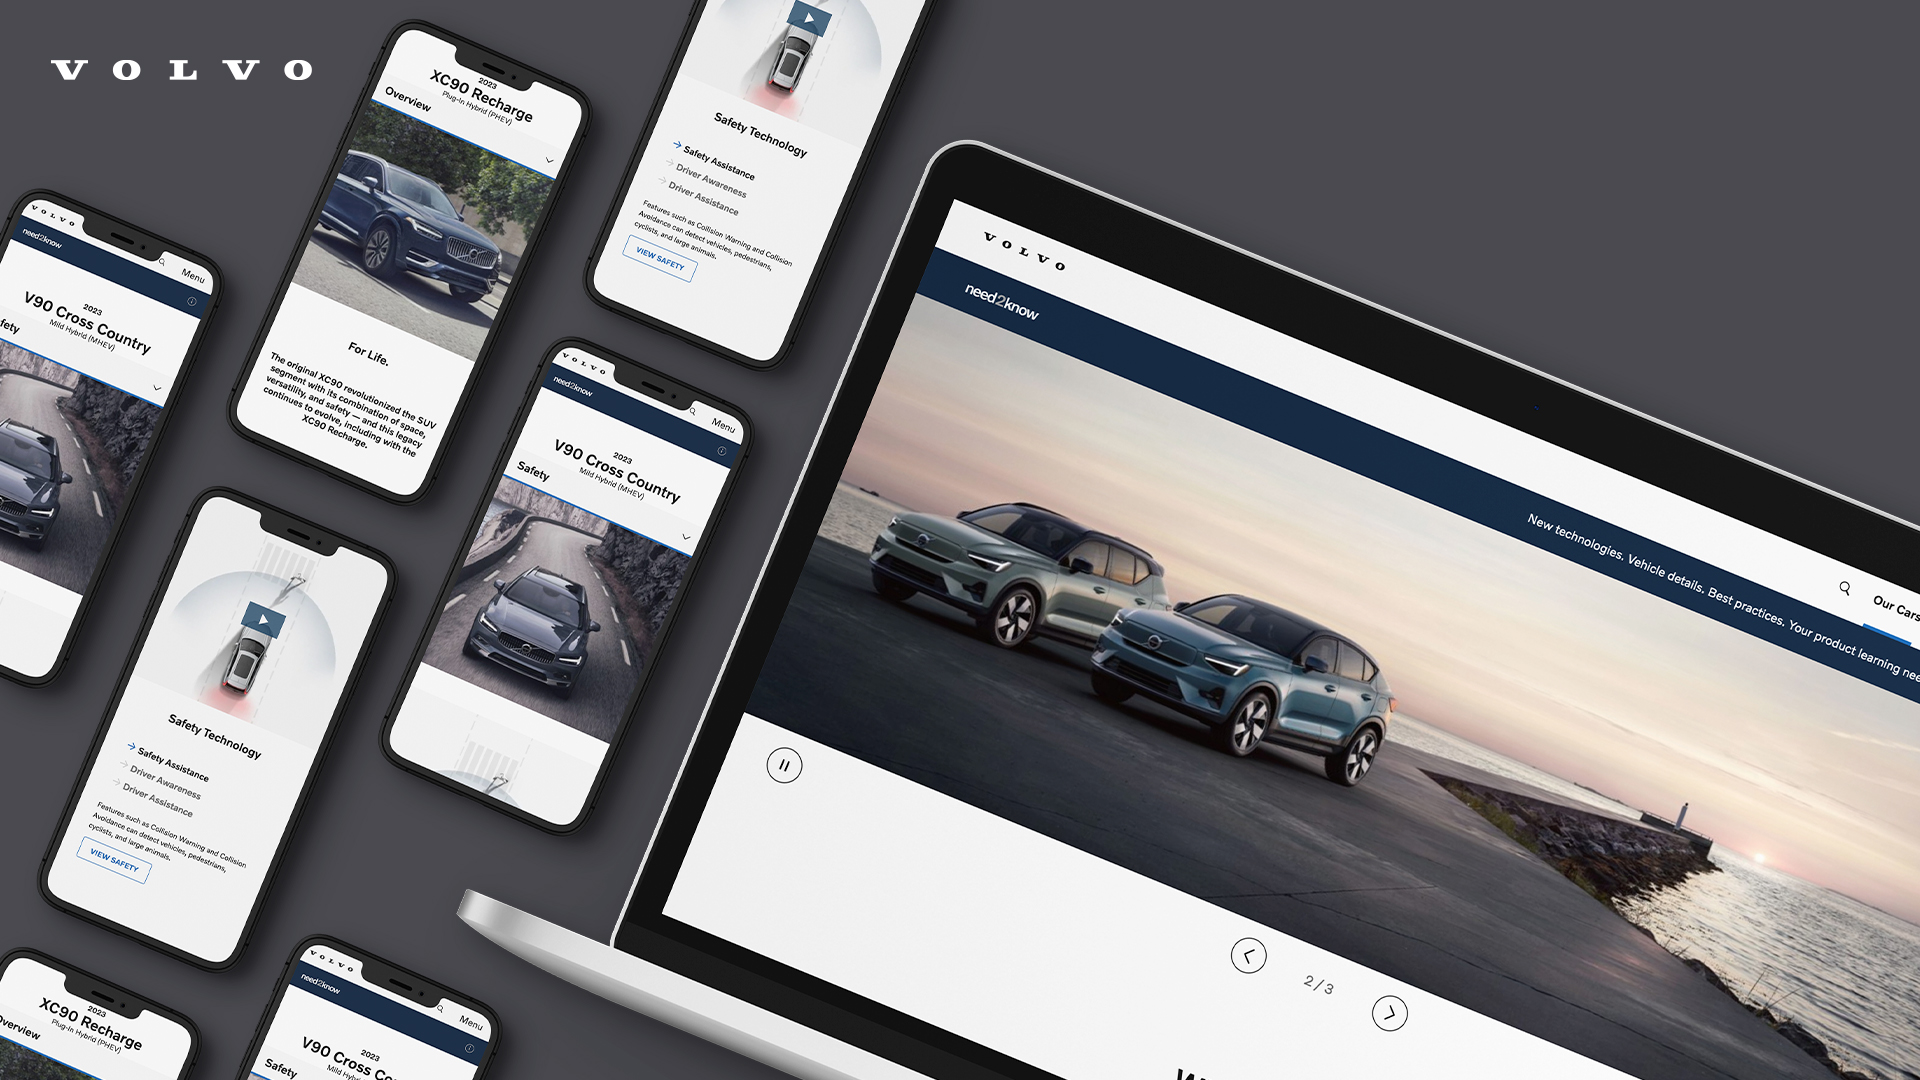 <strong>Volvo – need2know</strong><small>Ardent has designed and maintained several iterations of this product knowledge website for Volvo over the years, with our latest version being the best yet. Mobile optimized, easy to navigate, and fully loaded with information. </small>